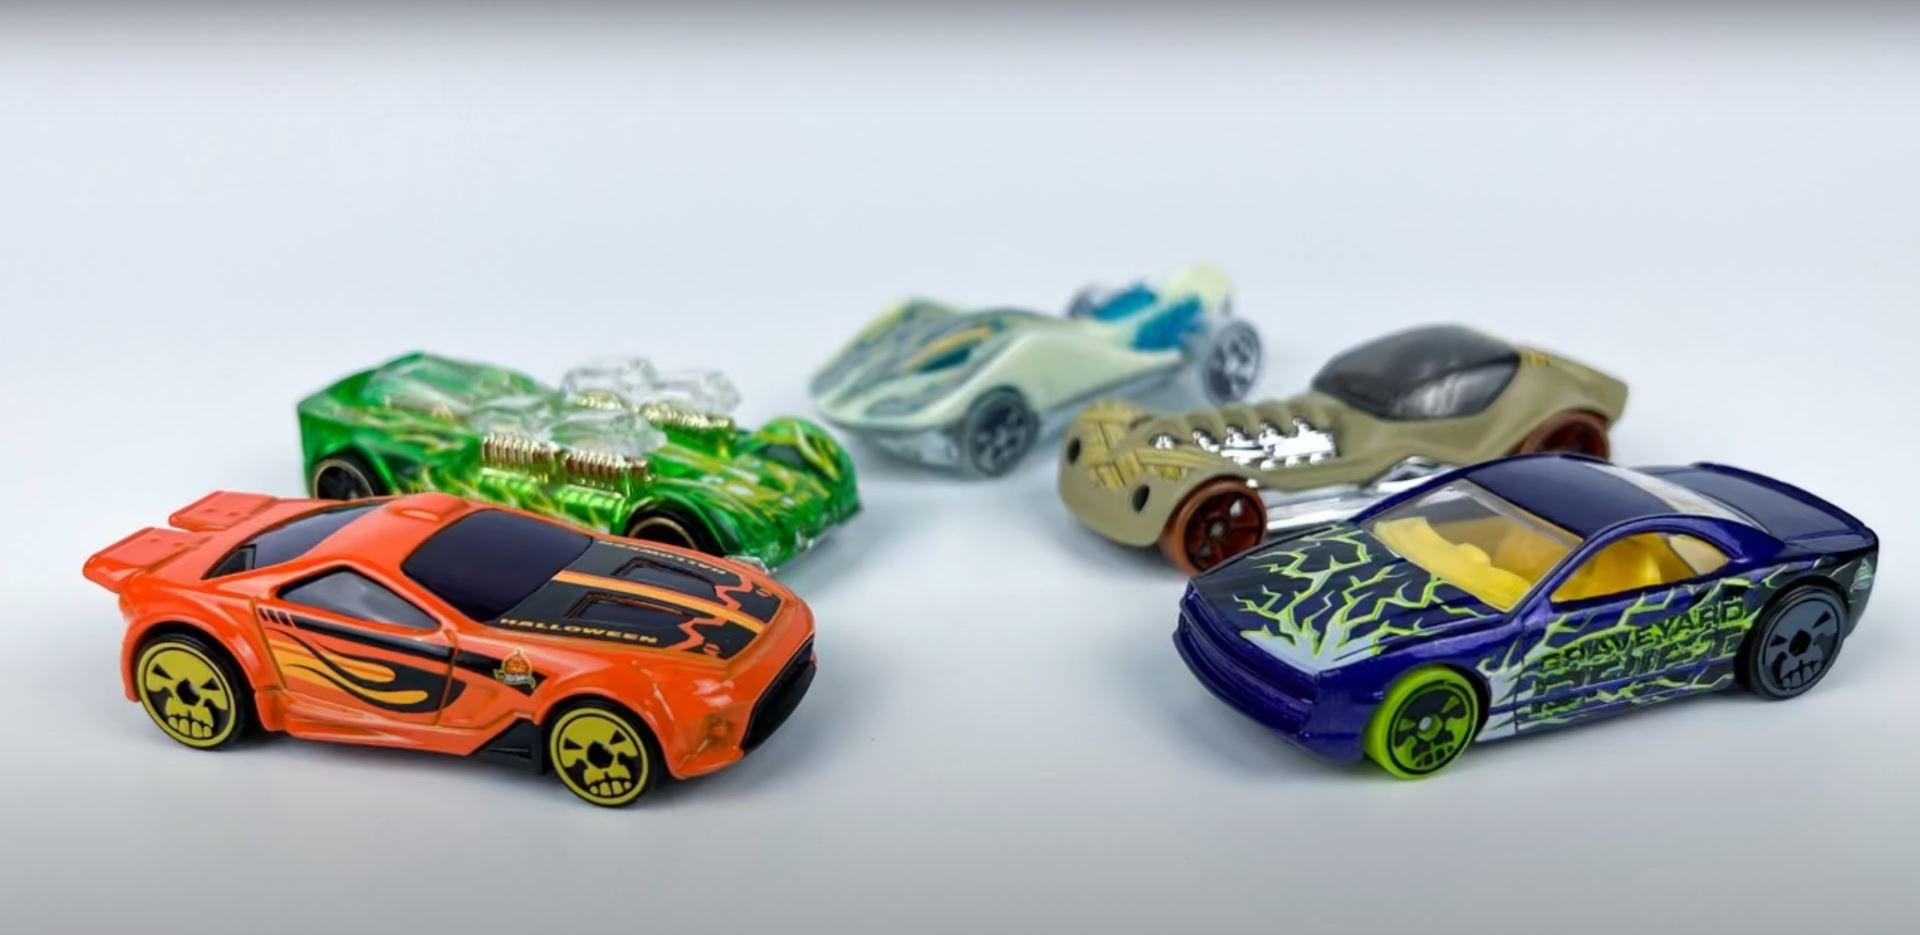 https://s1.cdn.autoevolution.com/images/news/it-s-trick-or-treat-time-with-set-of-five-hot-wheels-fantasy-cars-202523_1.jpg